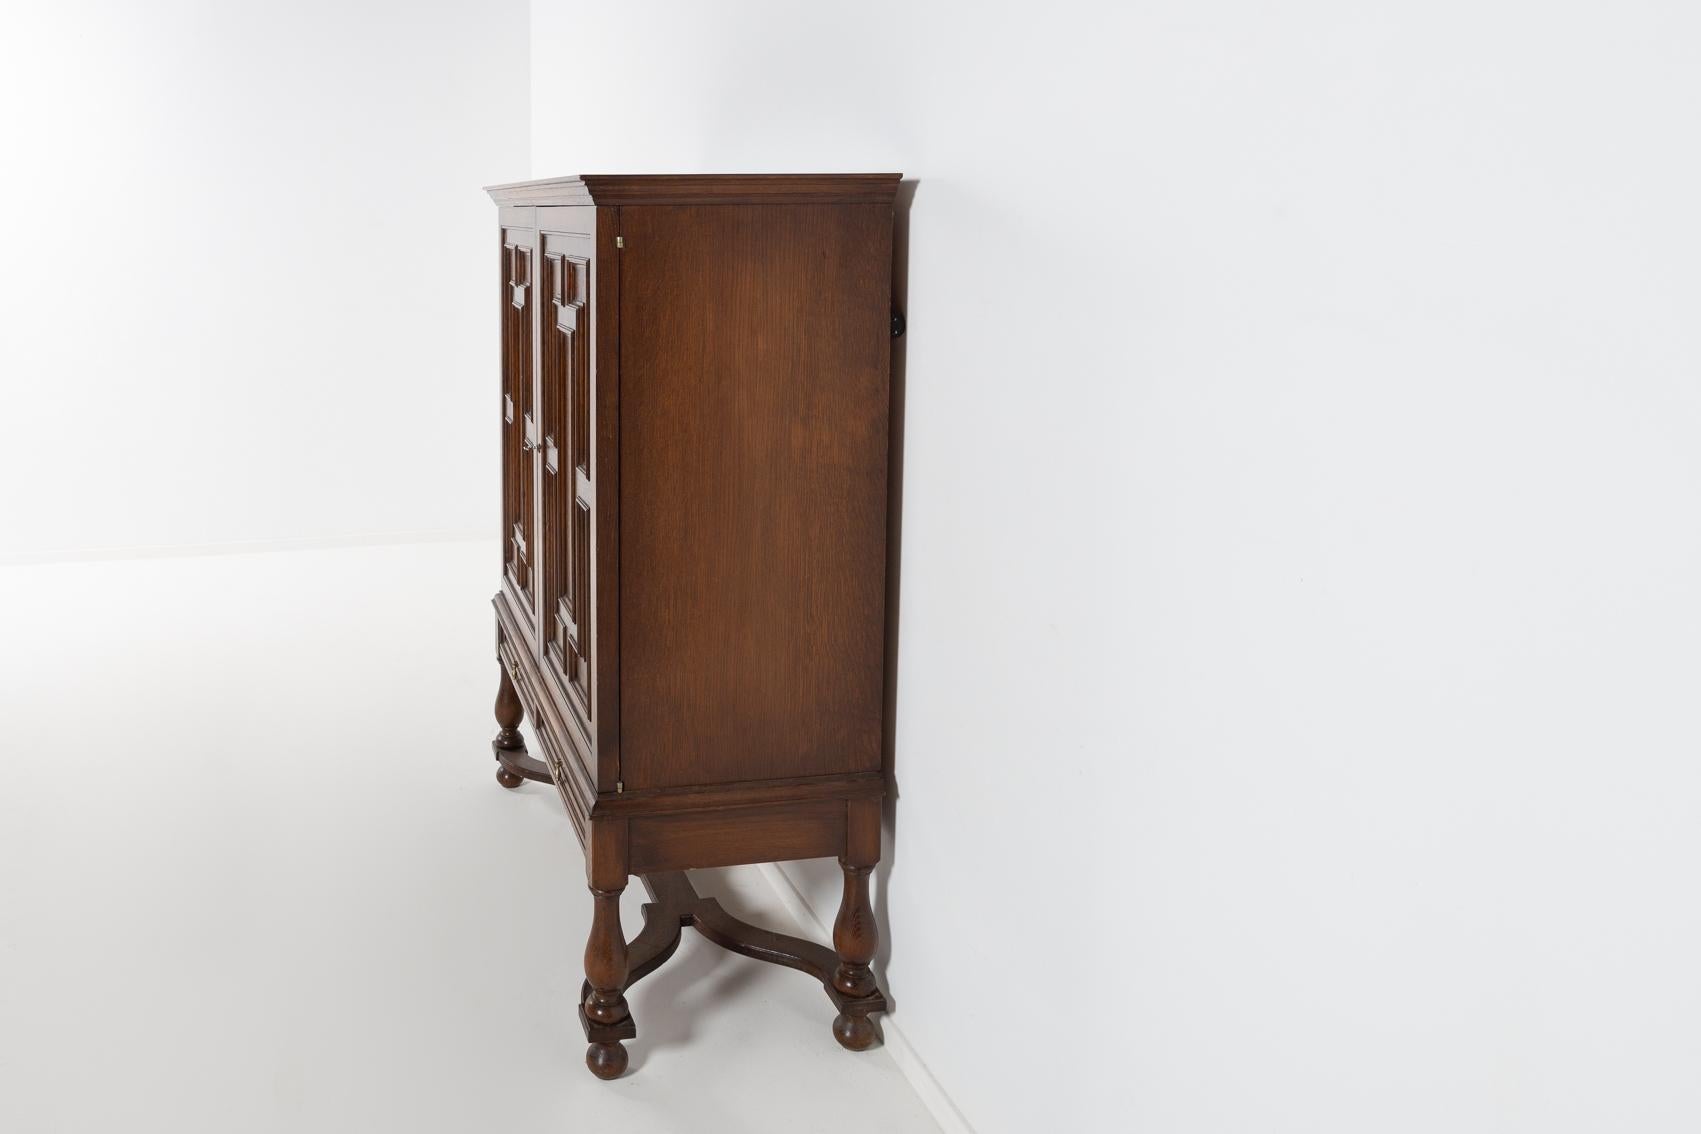 Mid-20th Century Unique Bar Cabinet from Axel Einar Hjorth by Nordiska Kompaniet, 1930’s For Sale